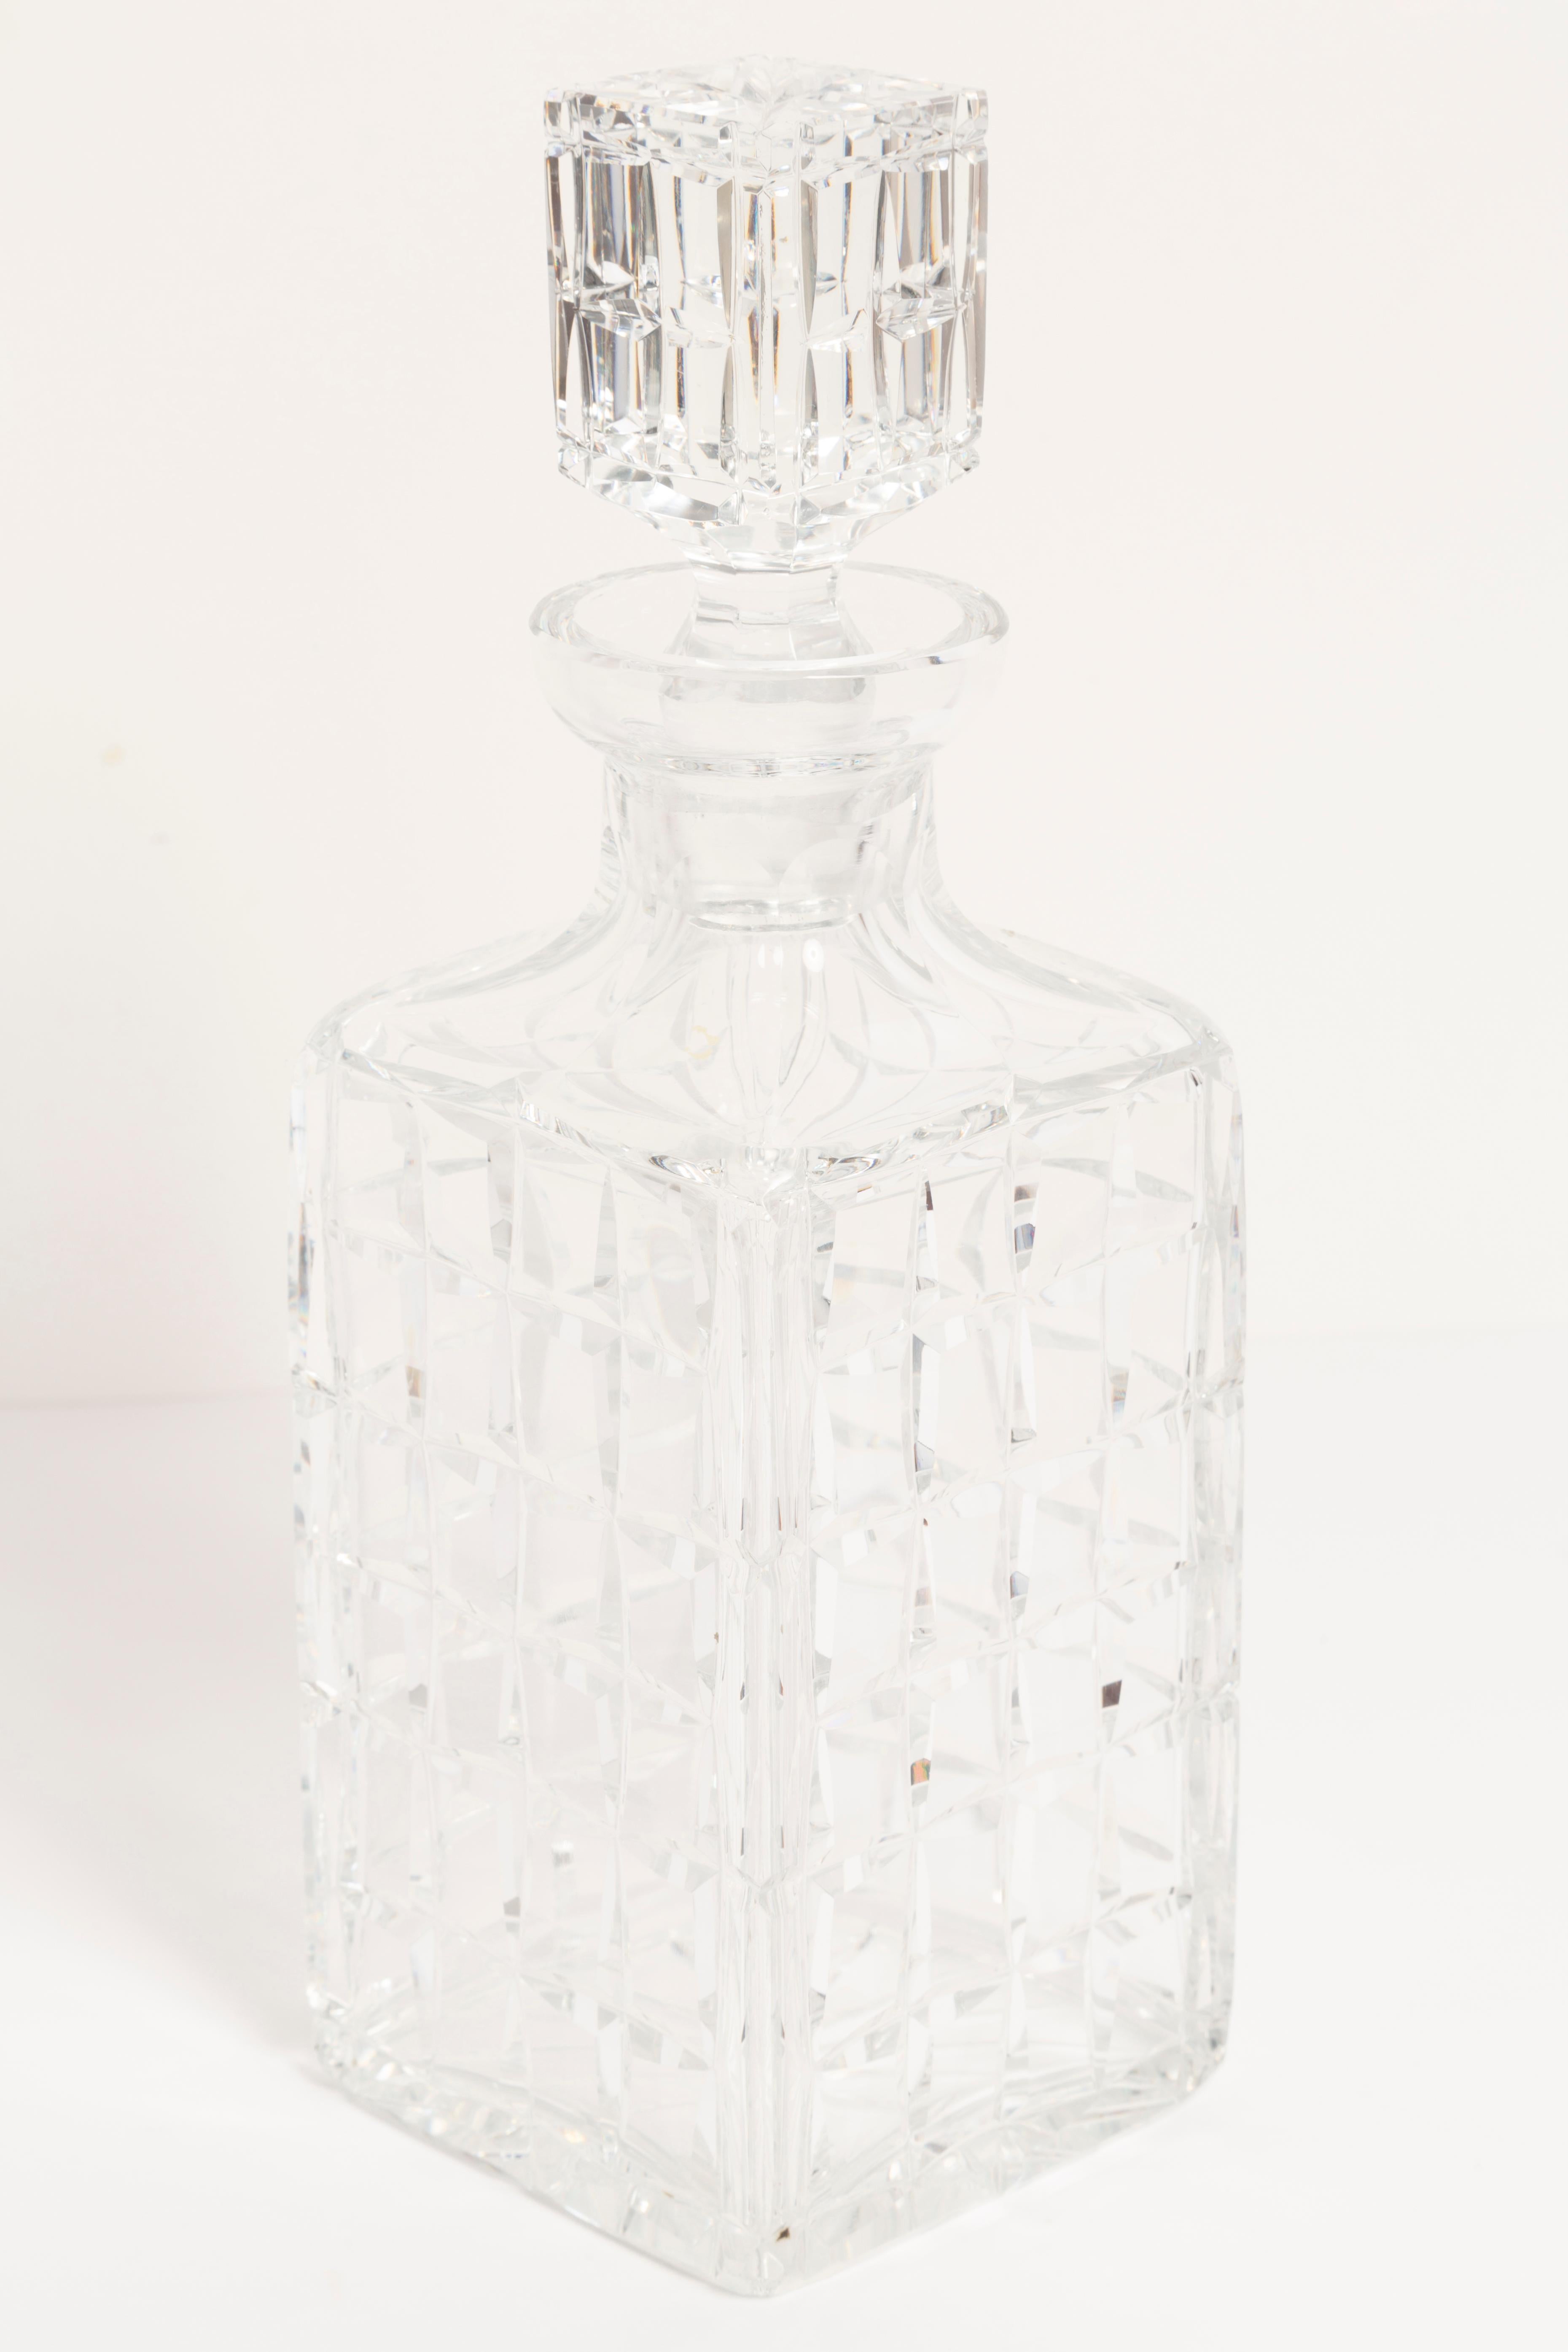 Czech Mid-Century Transparent Crystal Glass Decanter with Stopper, Europe, 1960s For Sale